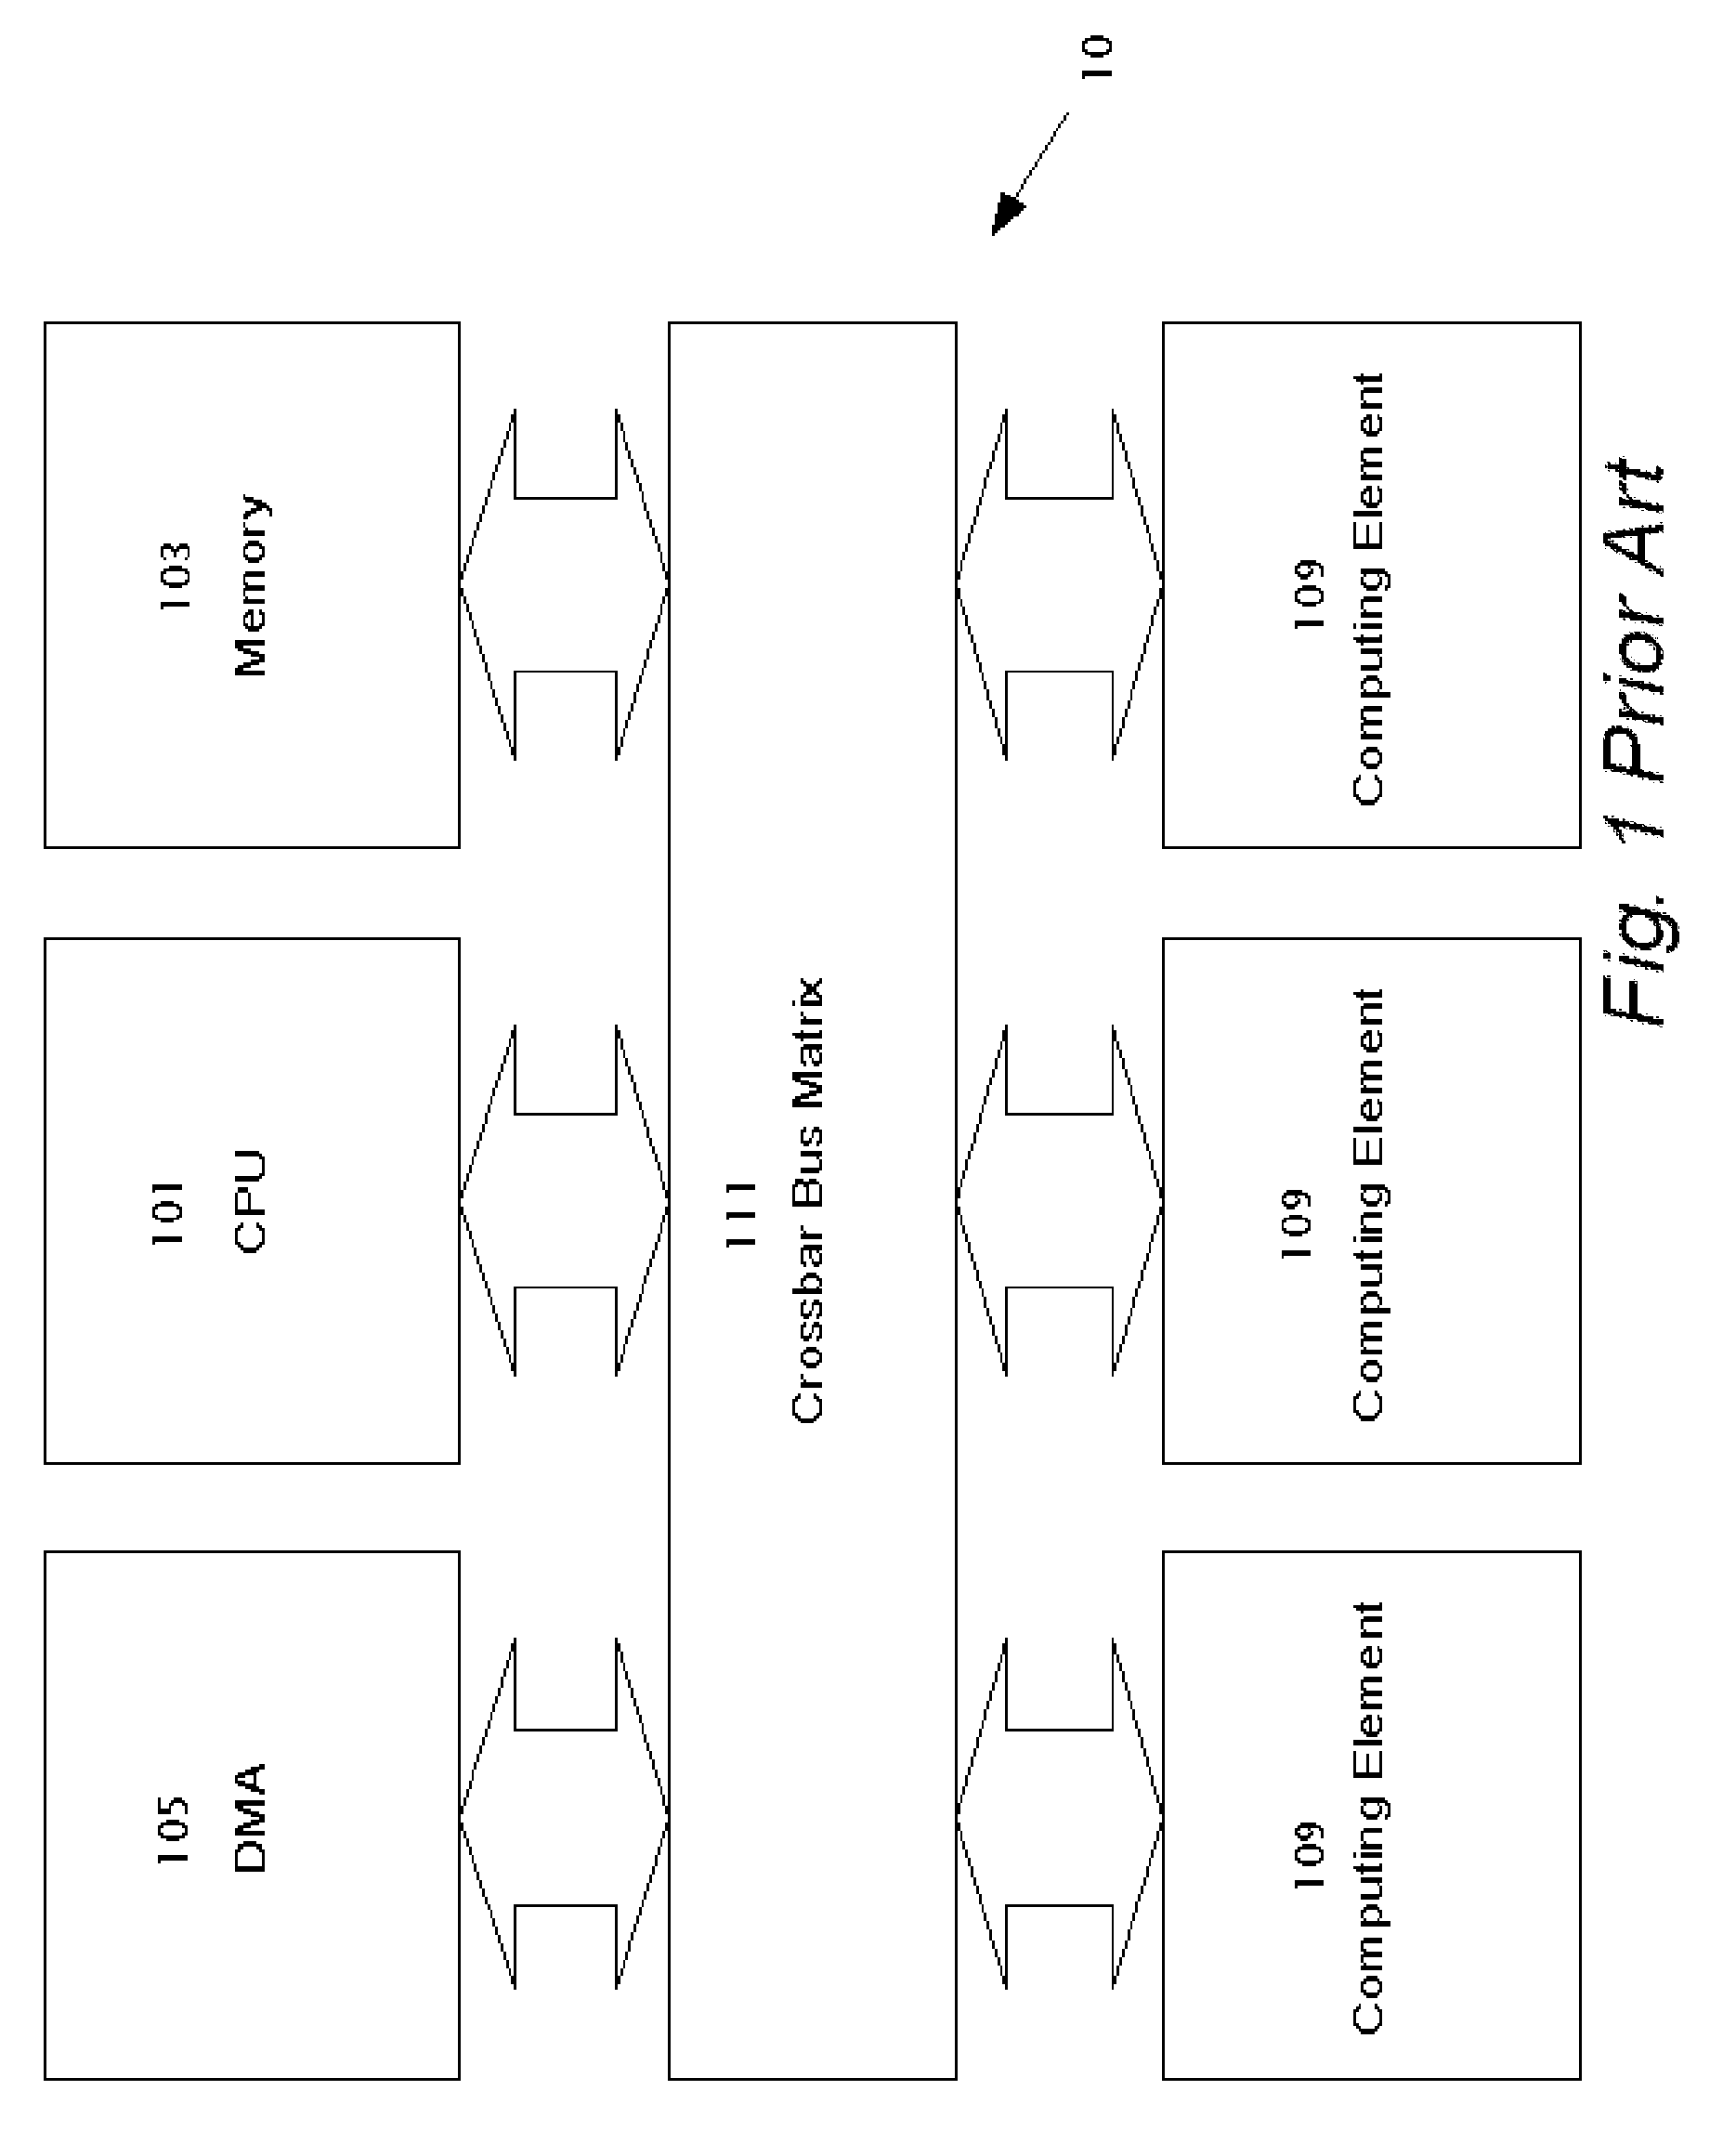 Scheduling of Multiple Tasks in a System Including Multiple Computing Elements